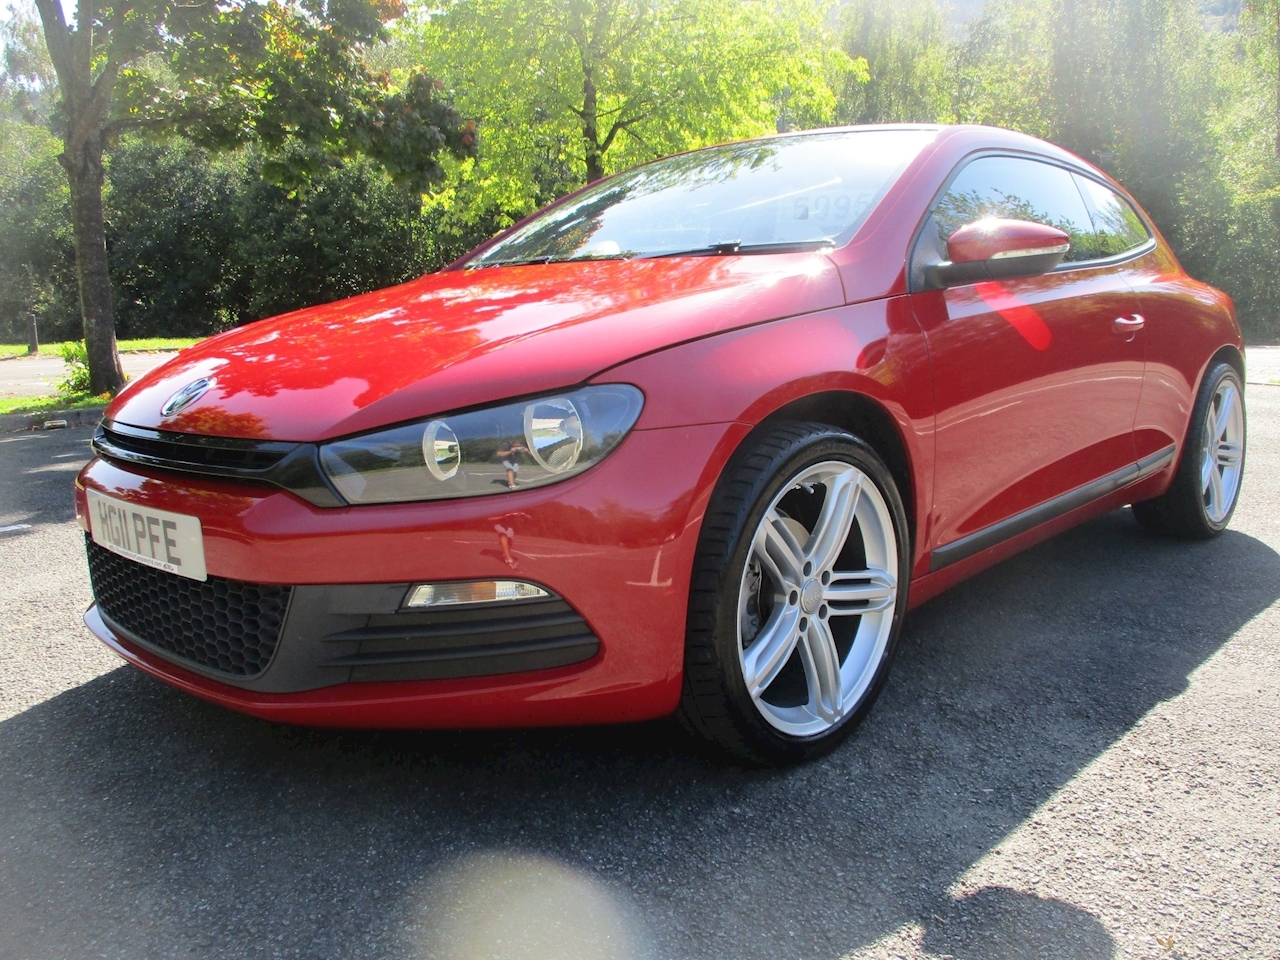 Scirocco 2.0 TDI Coupe 3dr Diesel Manual (134 g/km, 138 bhp) Coupe 2.0 Manual Diesel